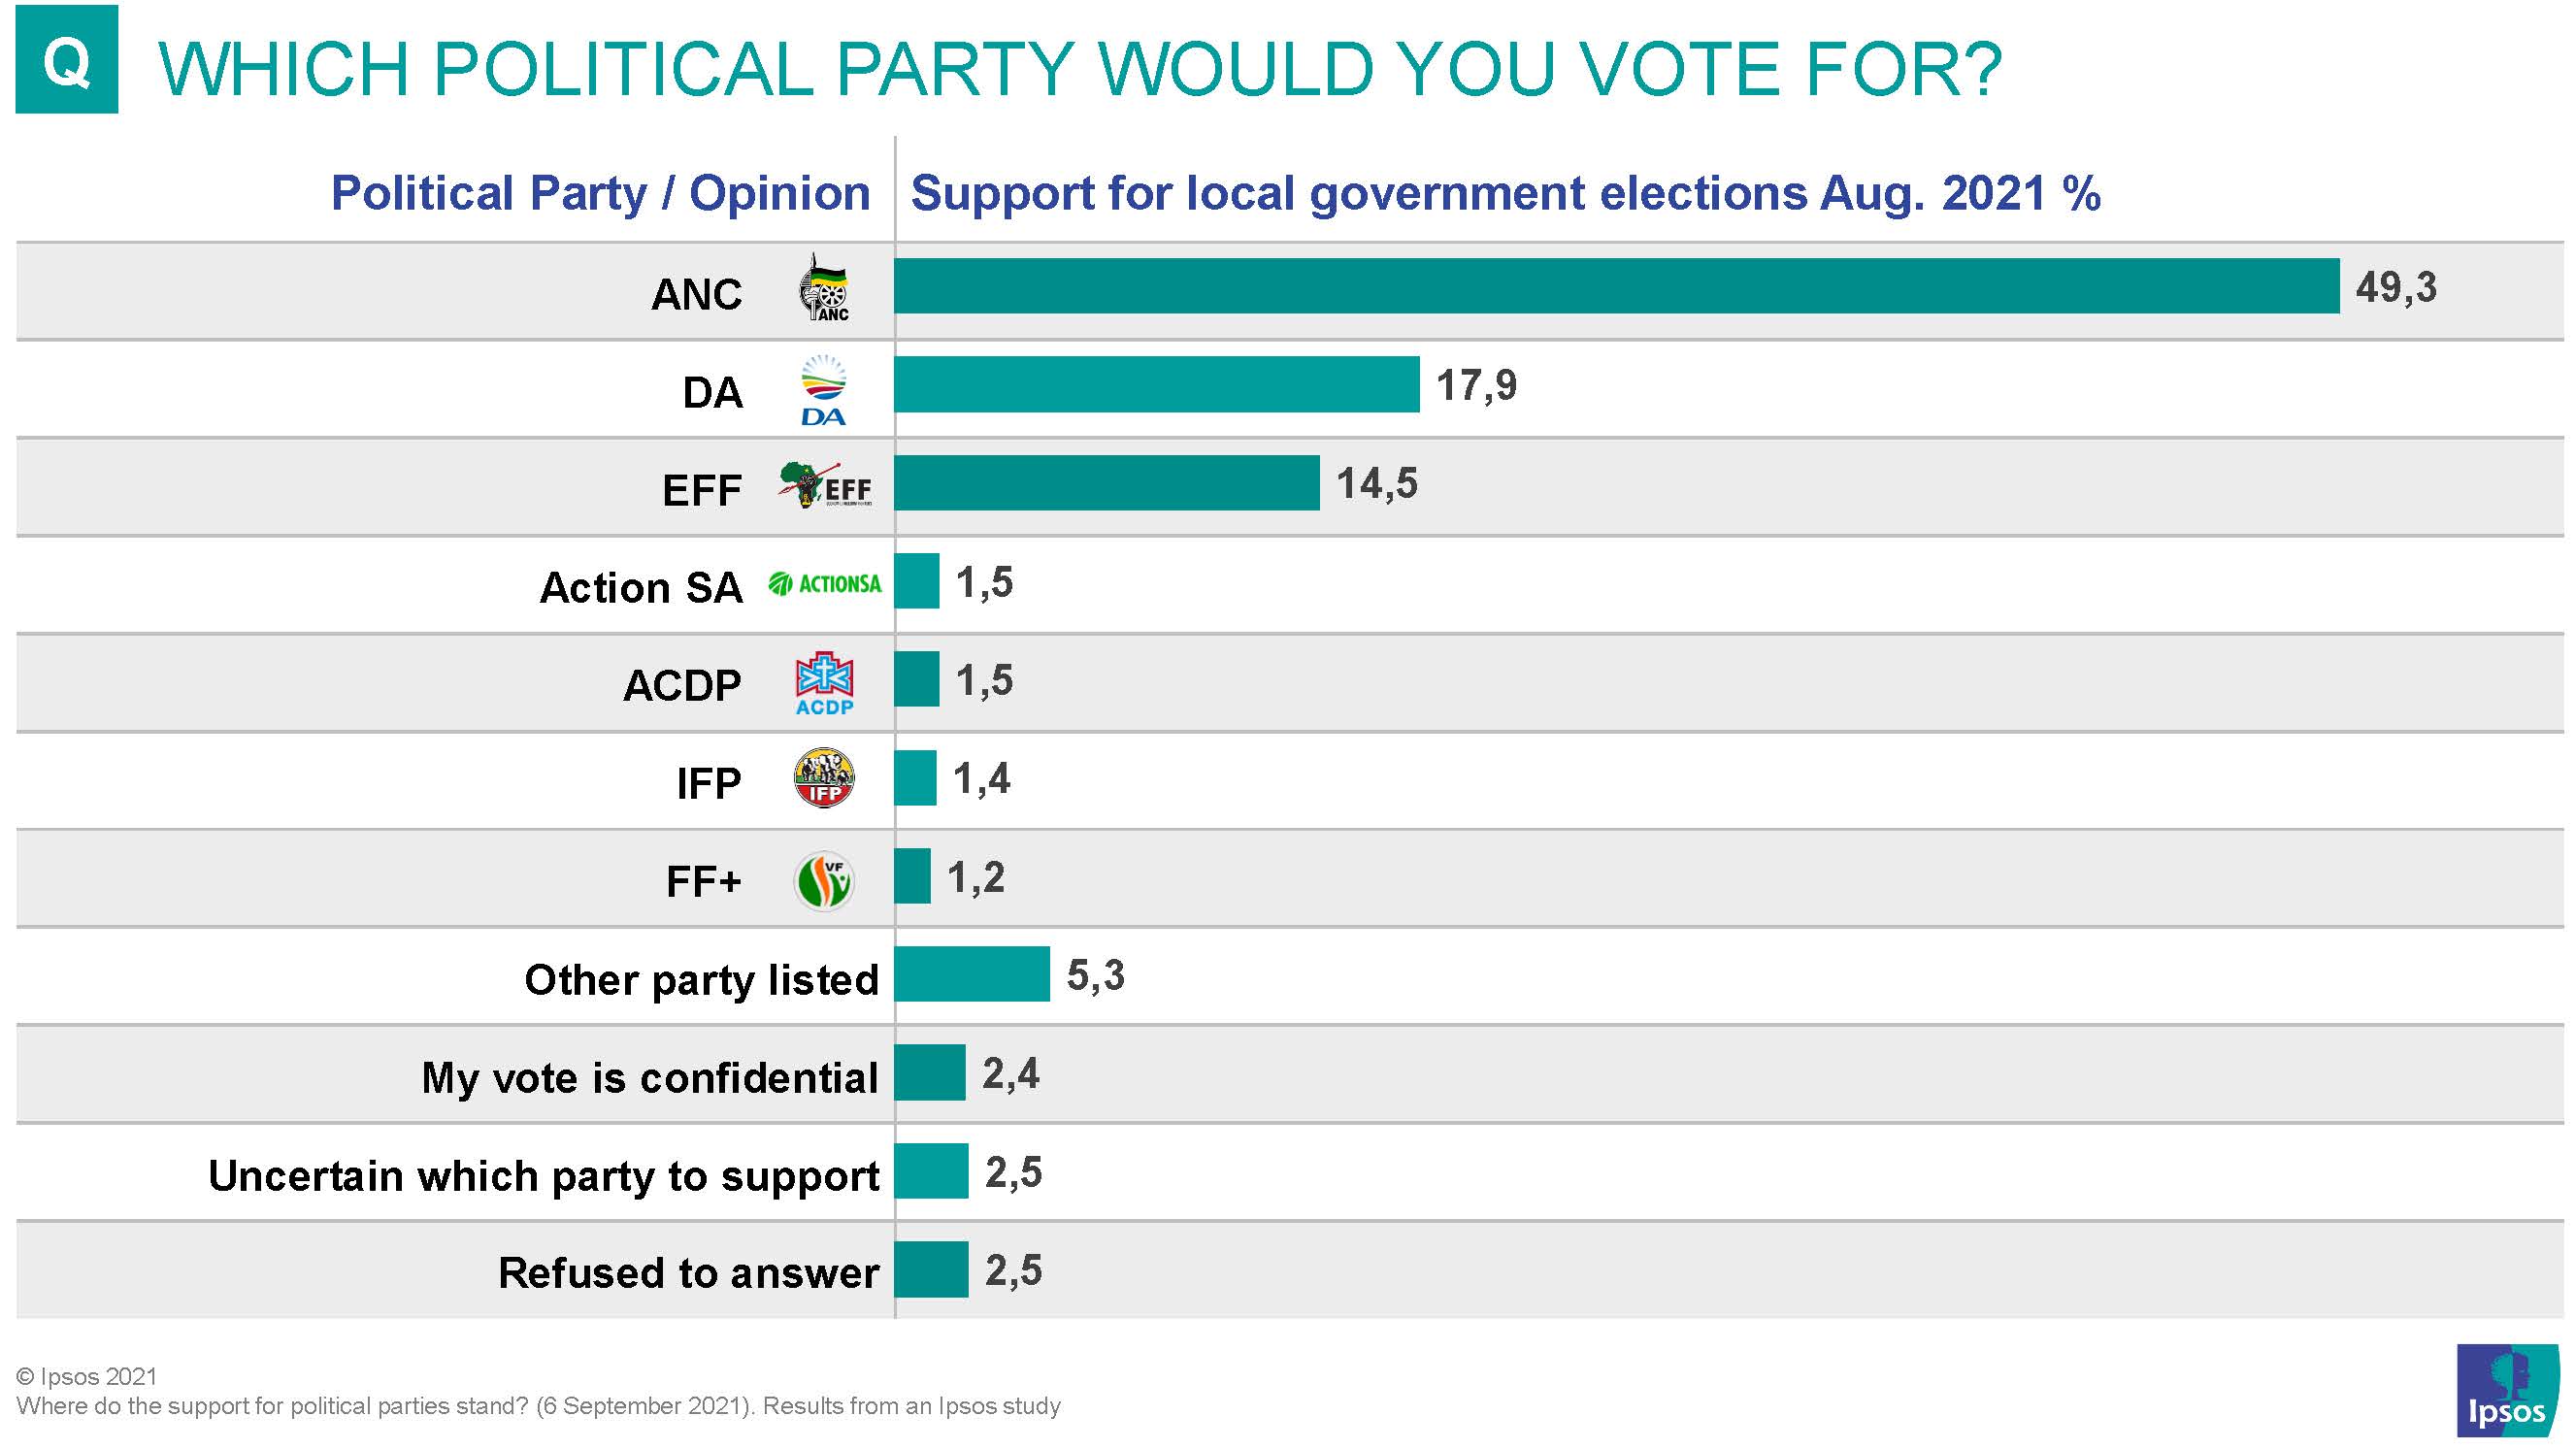 which political party woudl you vote for, anc, da, eff, action sa, acdp, ifp, ff, other